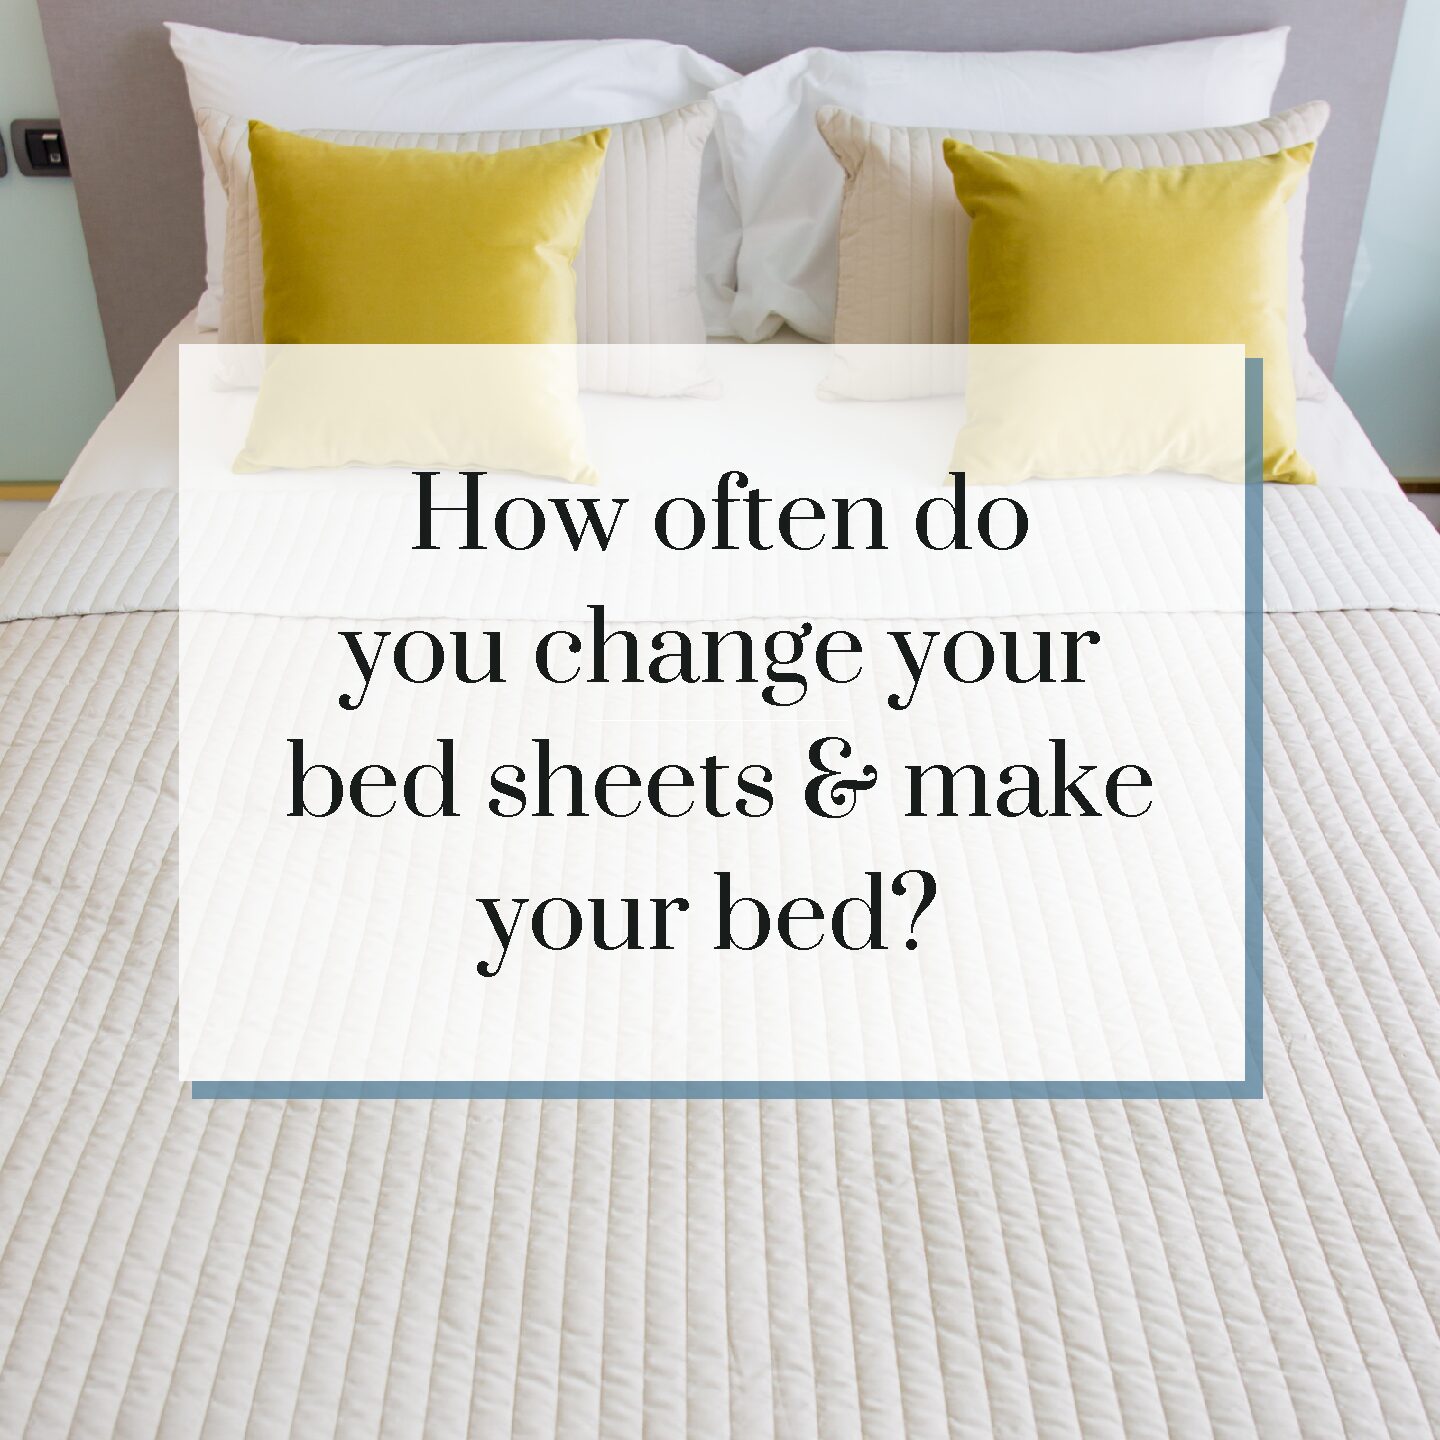 How often do you change and wash your bed sheets & make your bed?